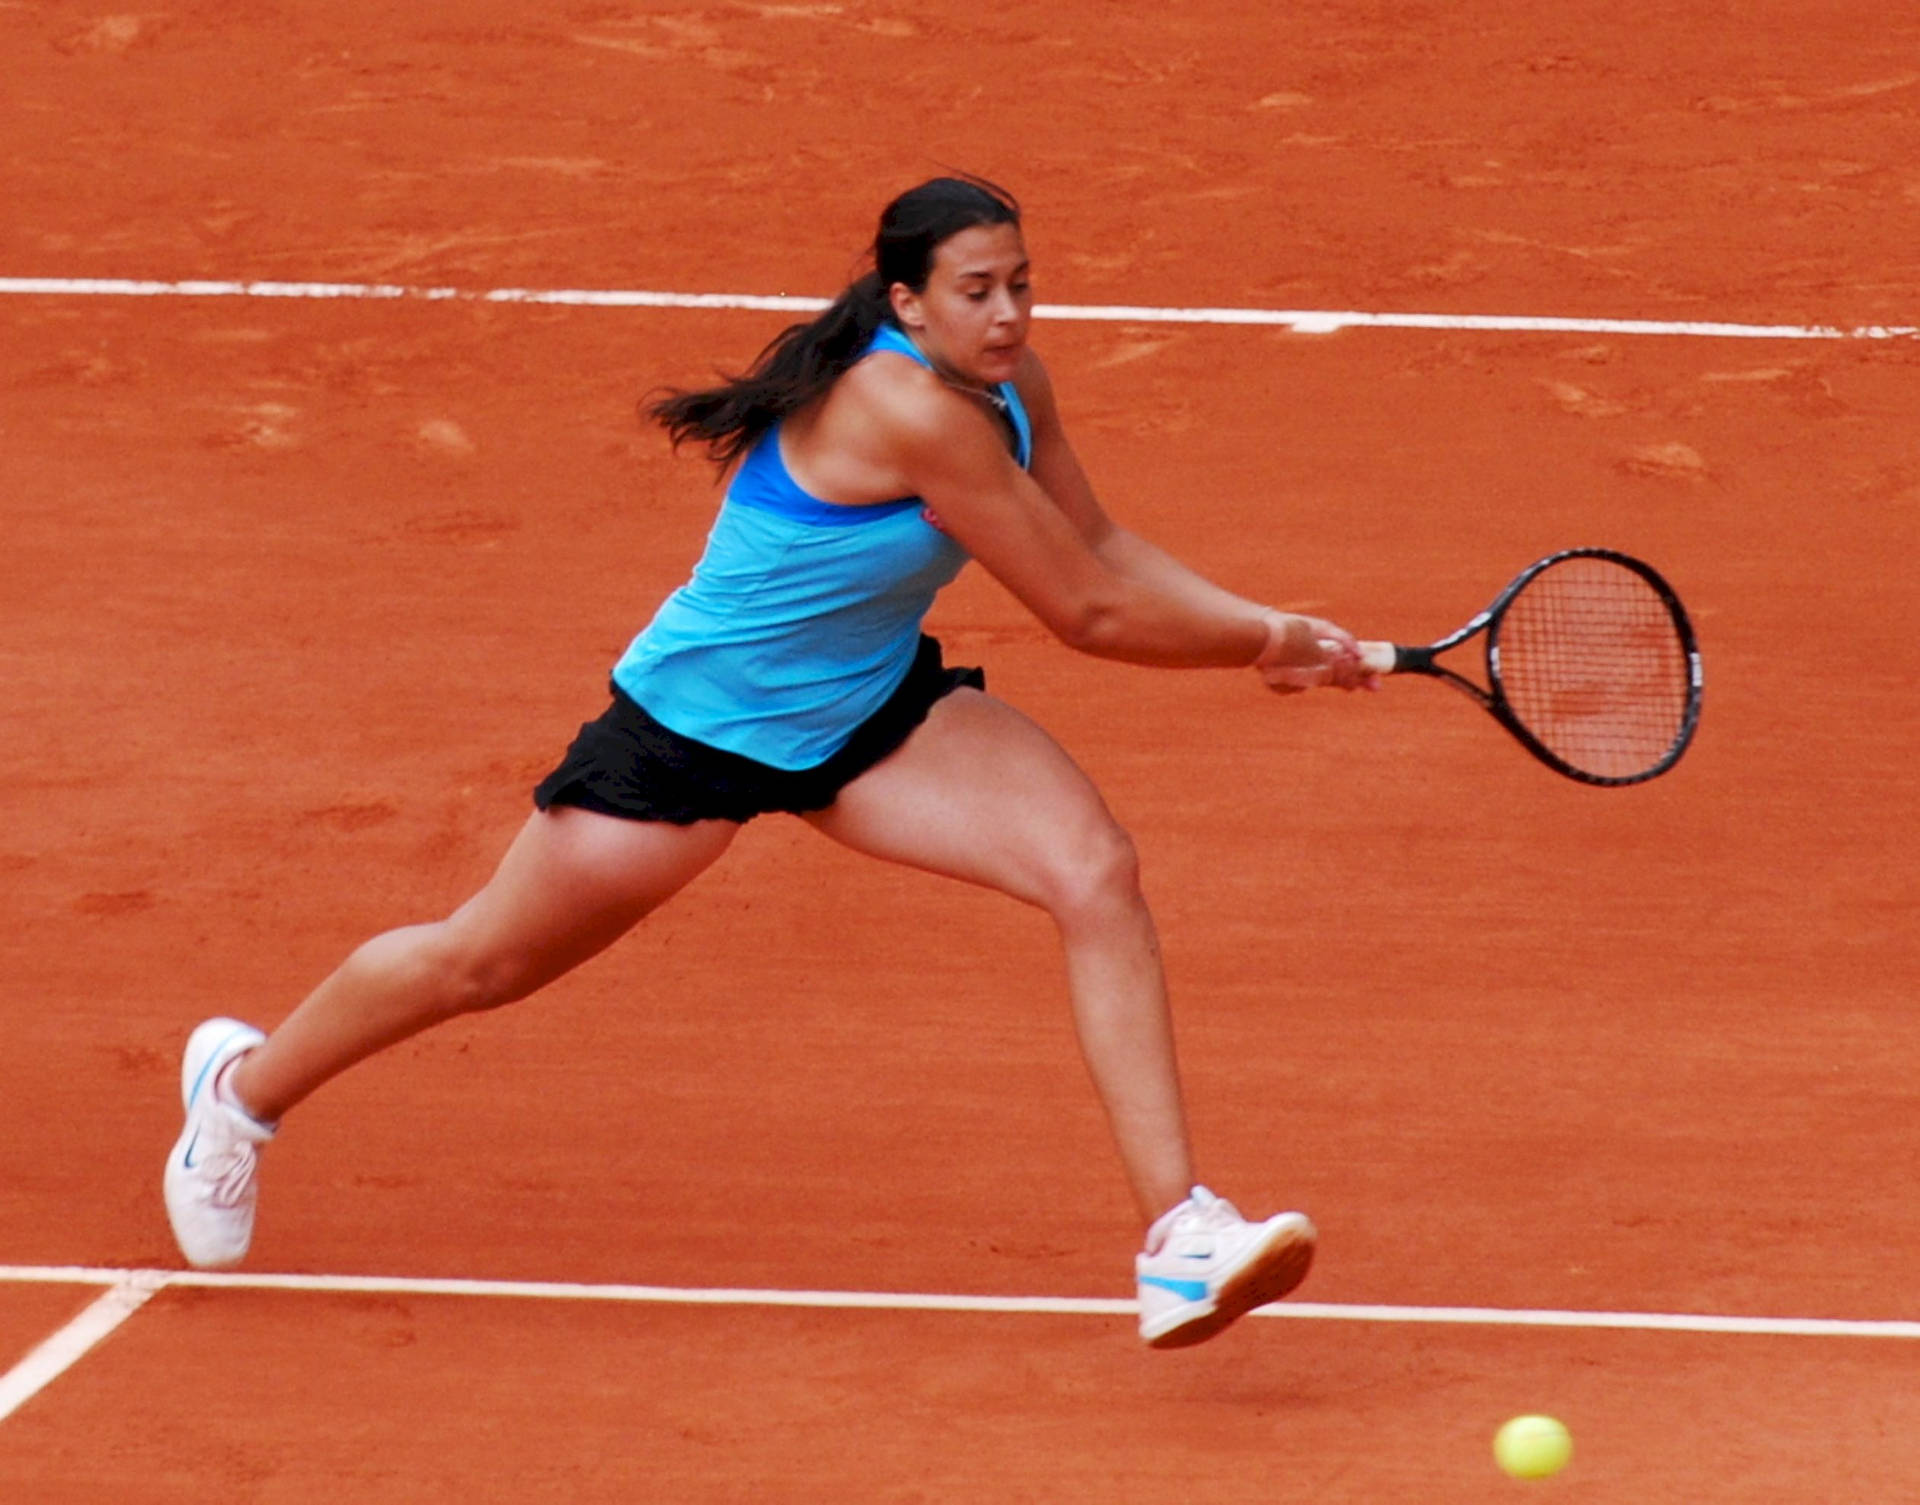 Marion Bartoli in action on a clay court Wallpaper